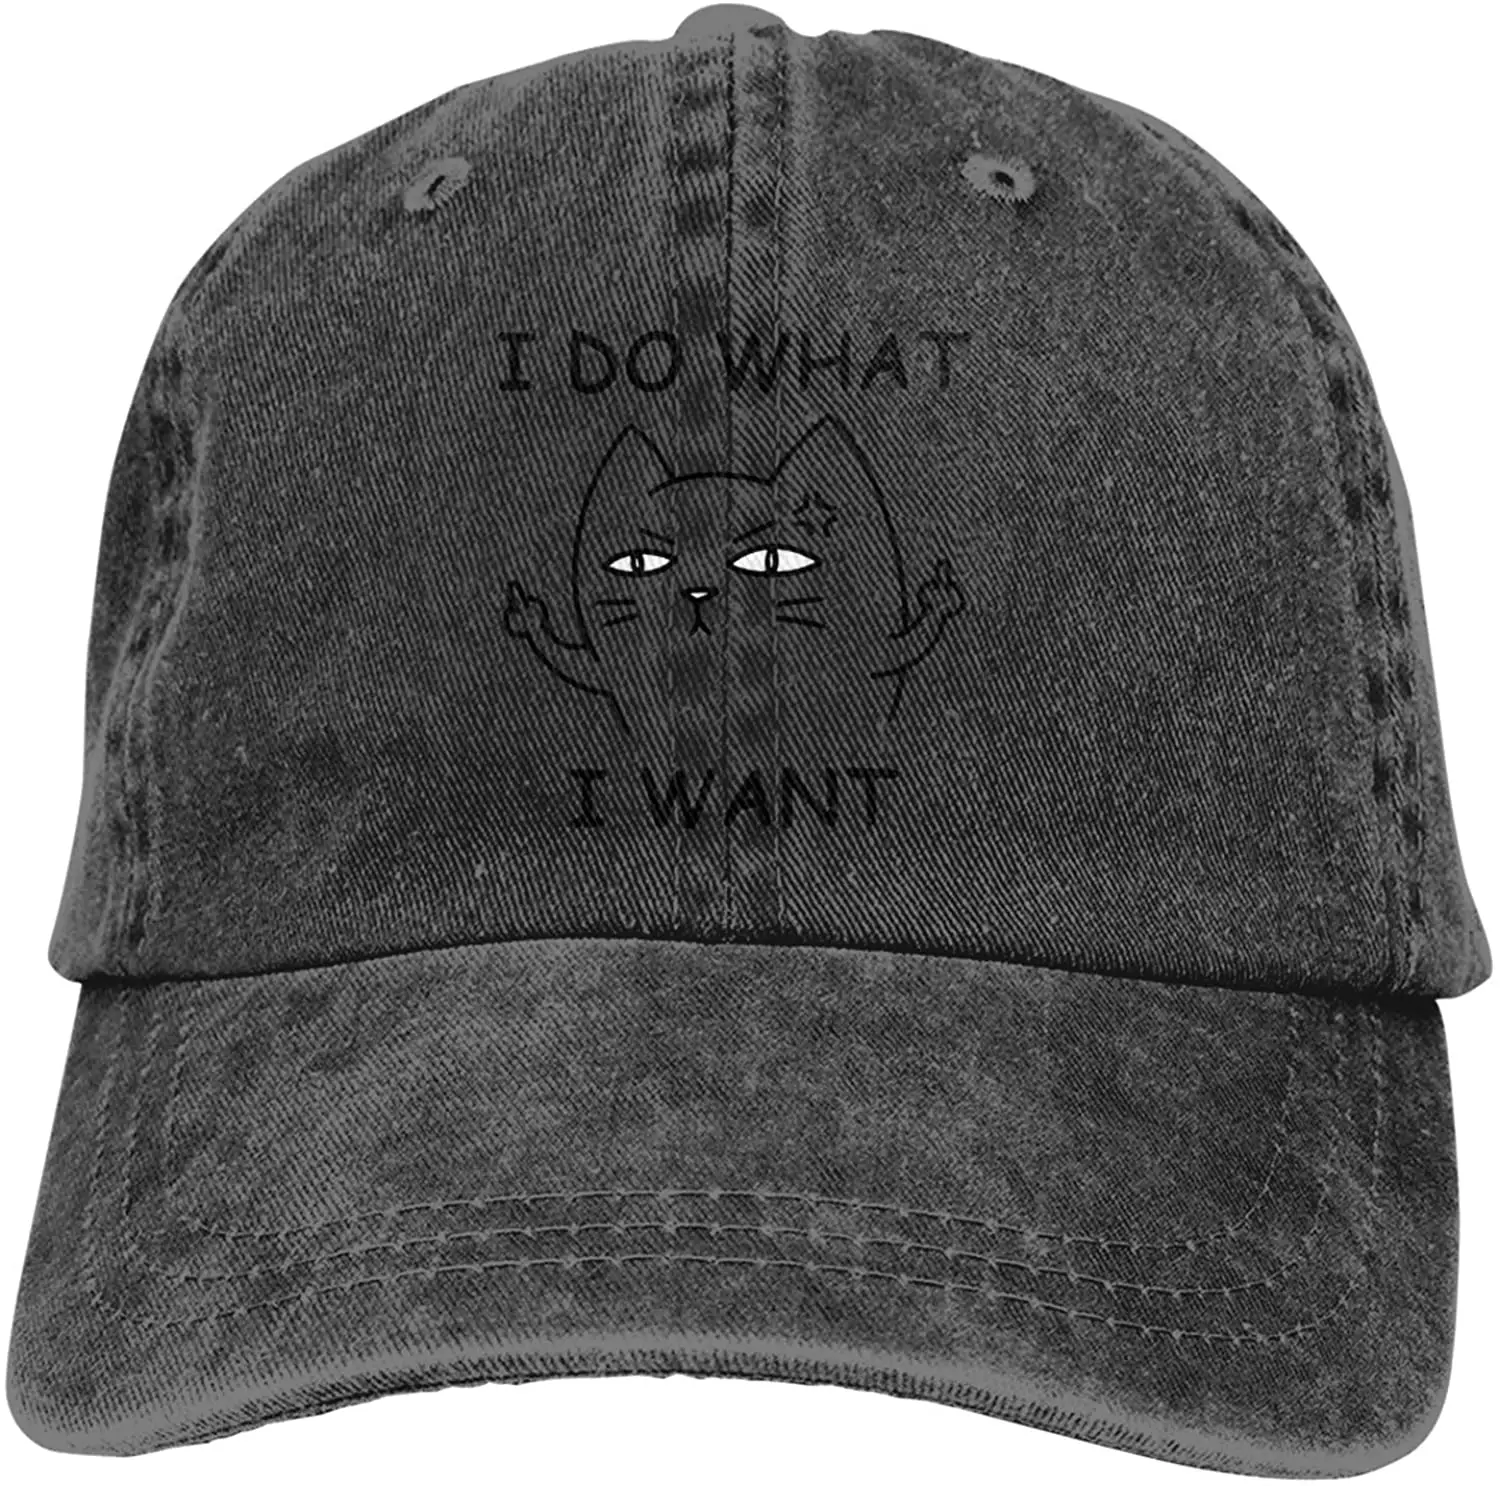 

I do What I Want with My cat Denim Dad Hat Cotton Vintage Baseball Cap Jeans Casquette Adjustable Trucker Caps